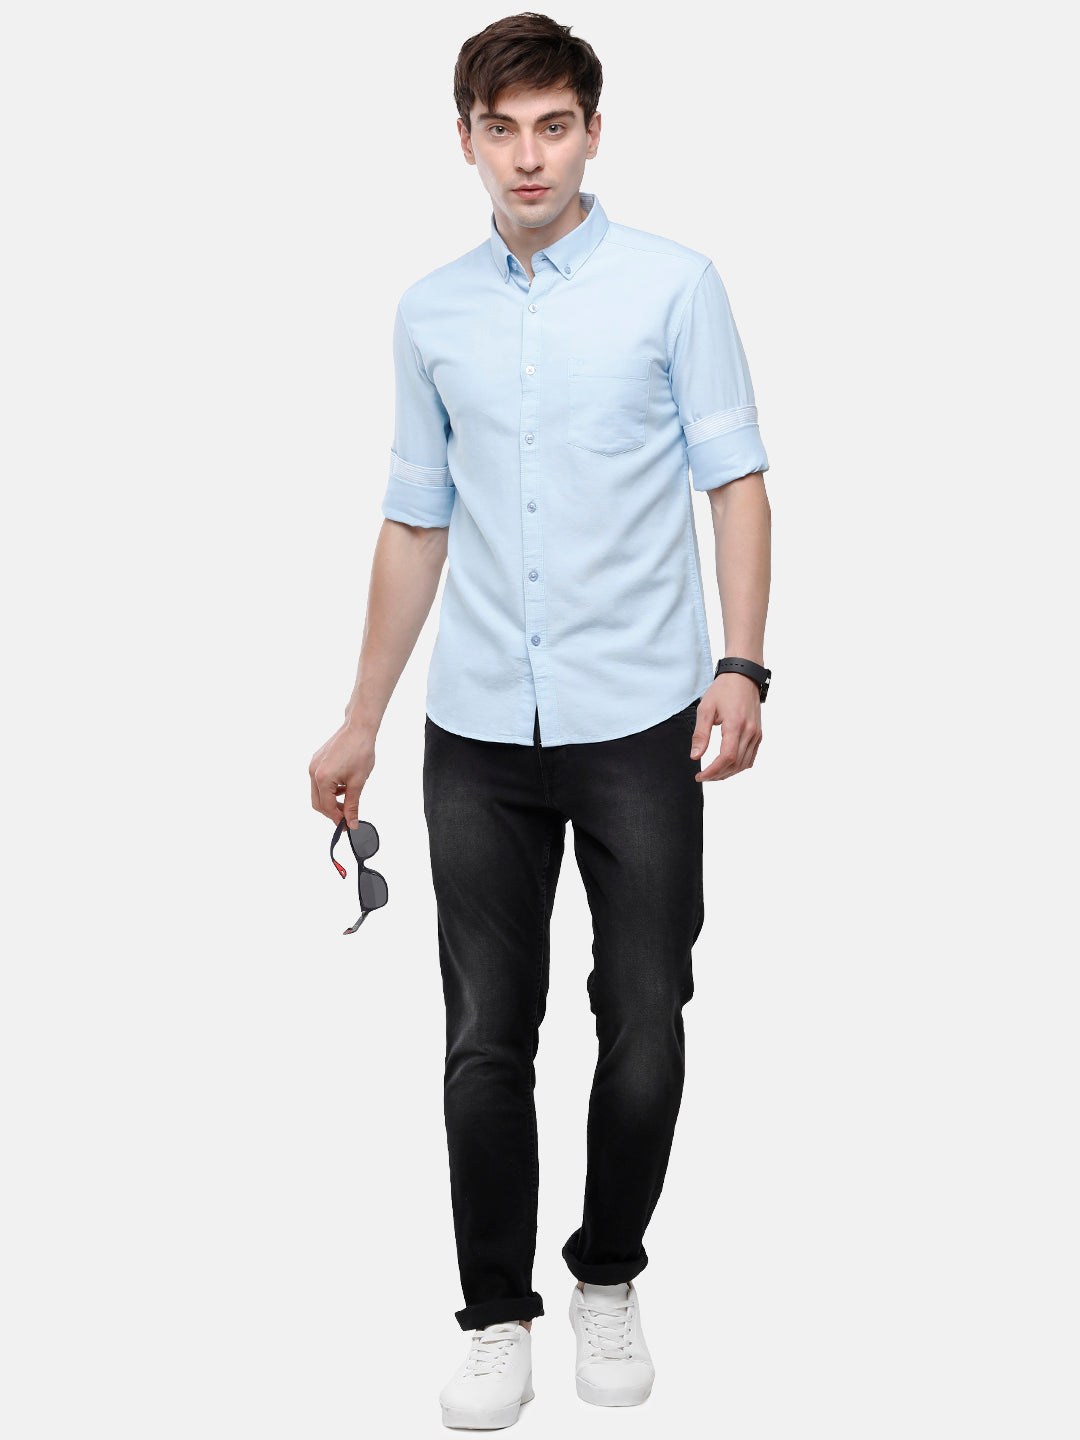 Classic Polo Men's Cotton Light Blue Solid Full Sleeve Shirt - Enzo ...